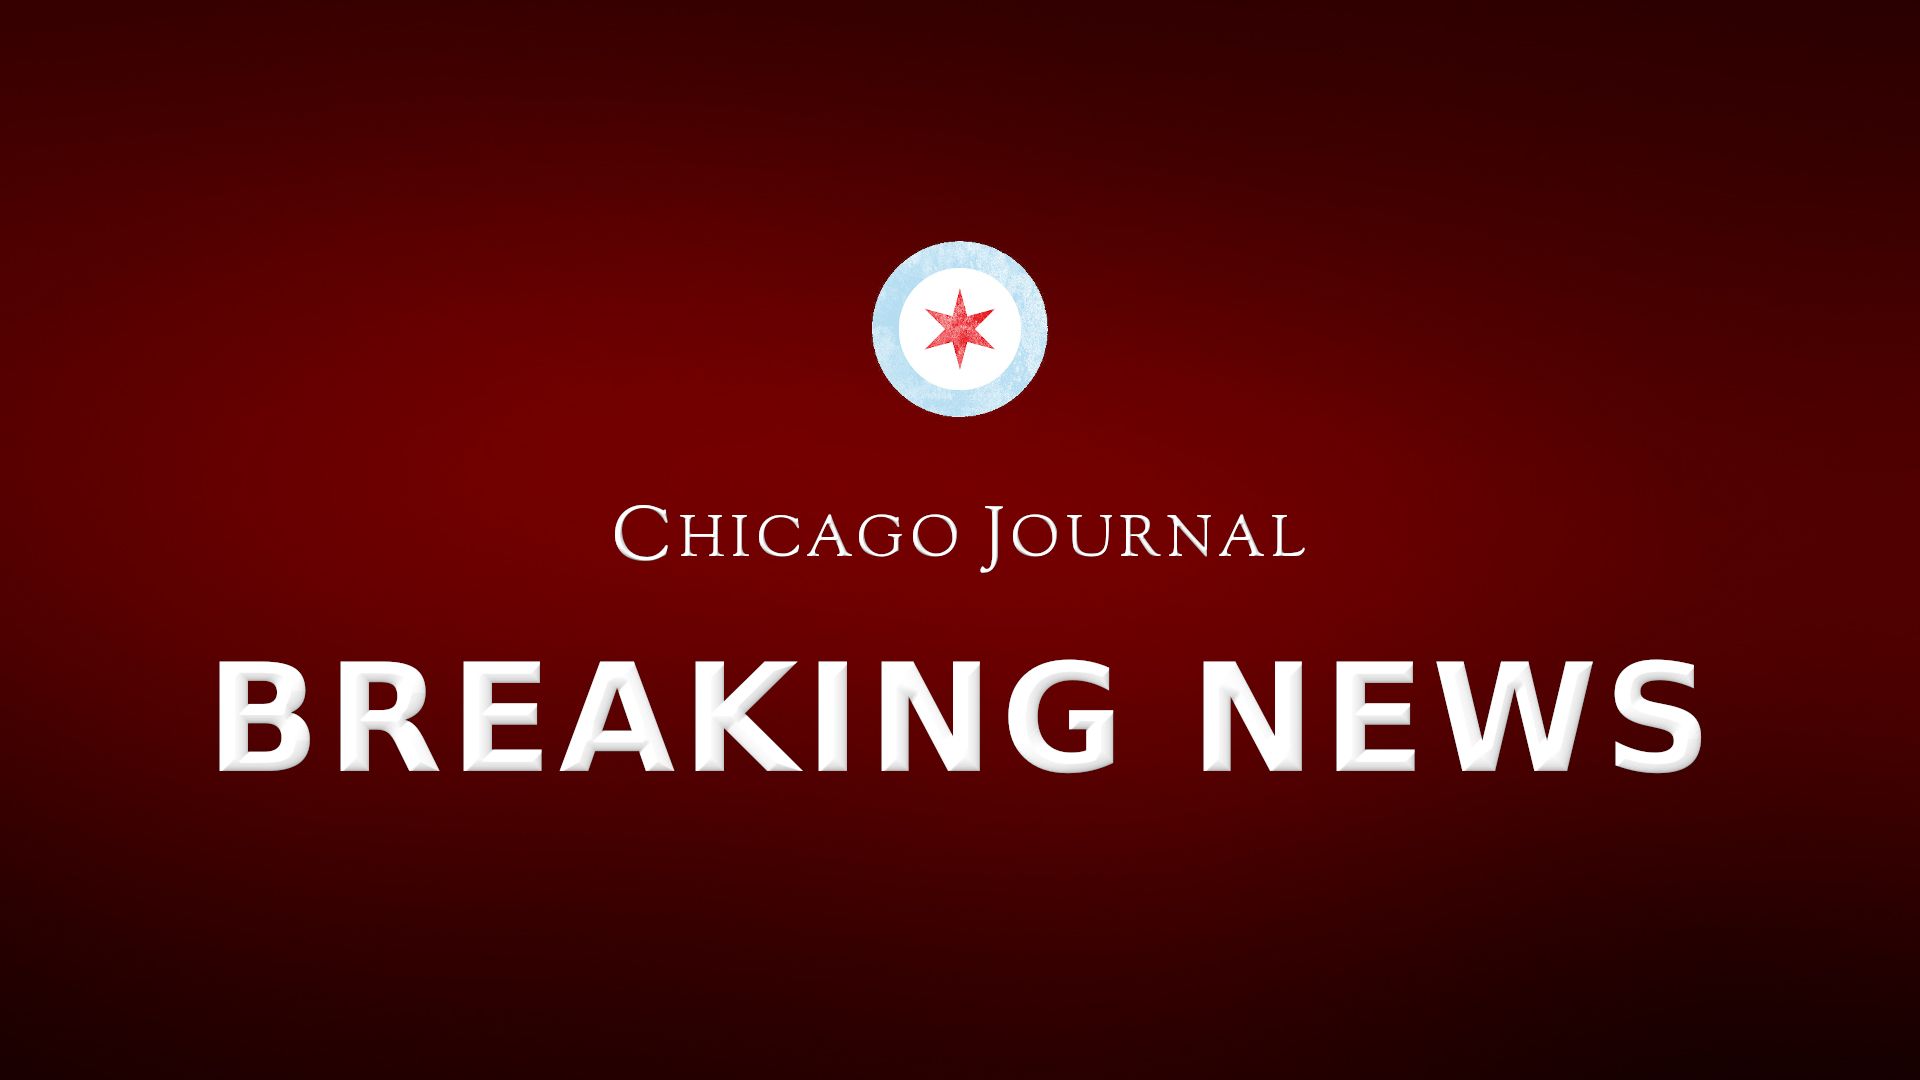 Two Chicago police officers shot in suburban Lyons